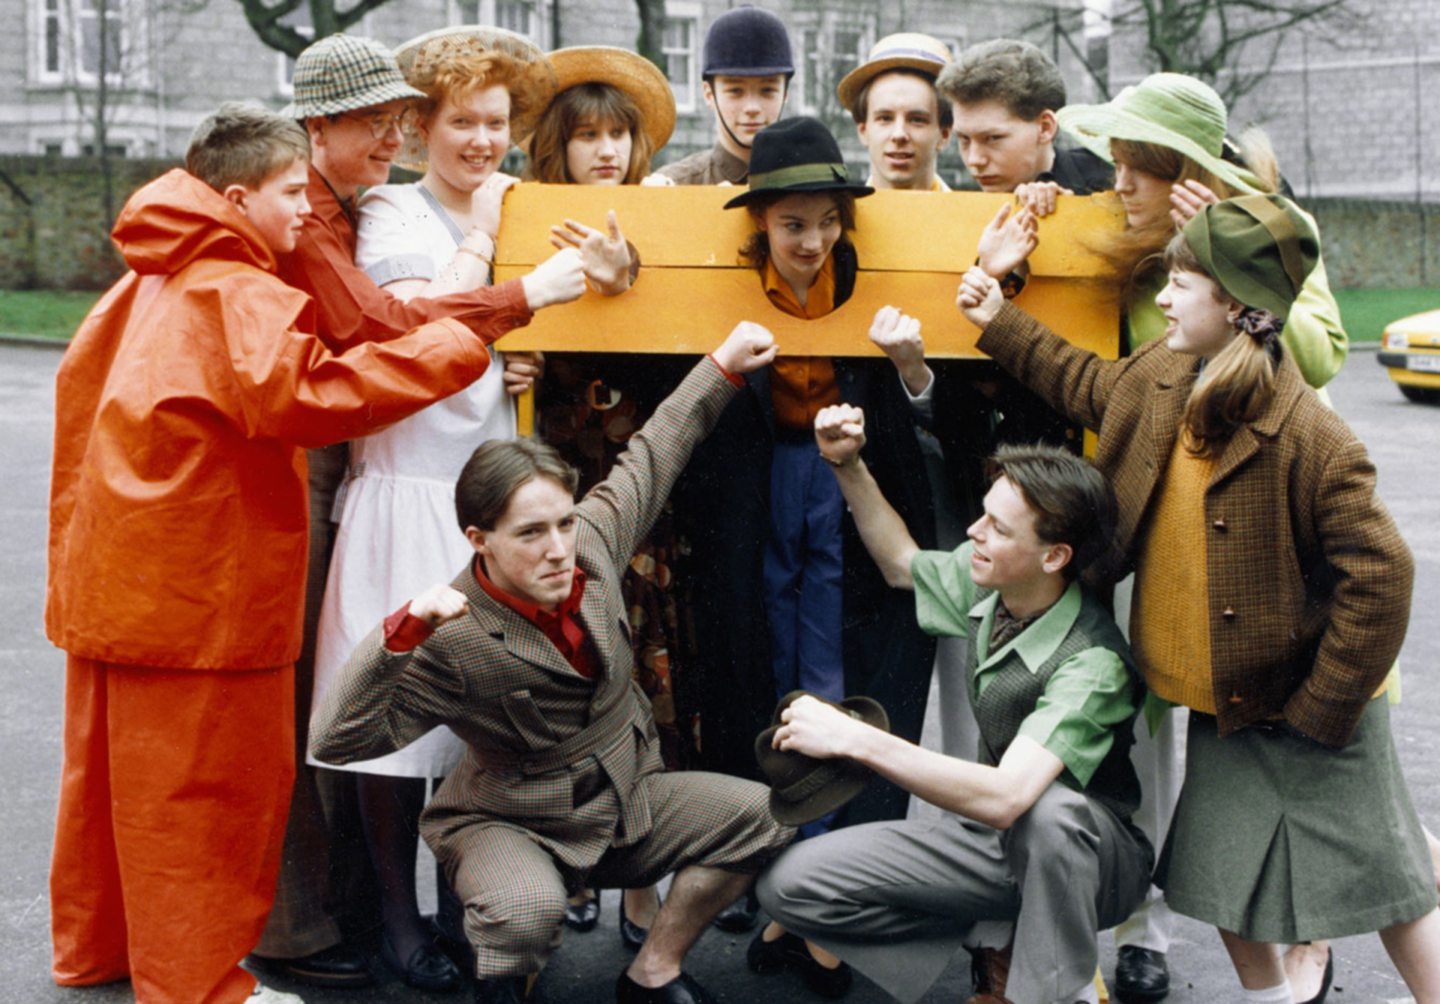 Members of the school's Dramatic Society play out a scene in the musical Free as Air in 1991.